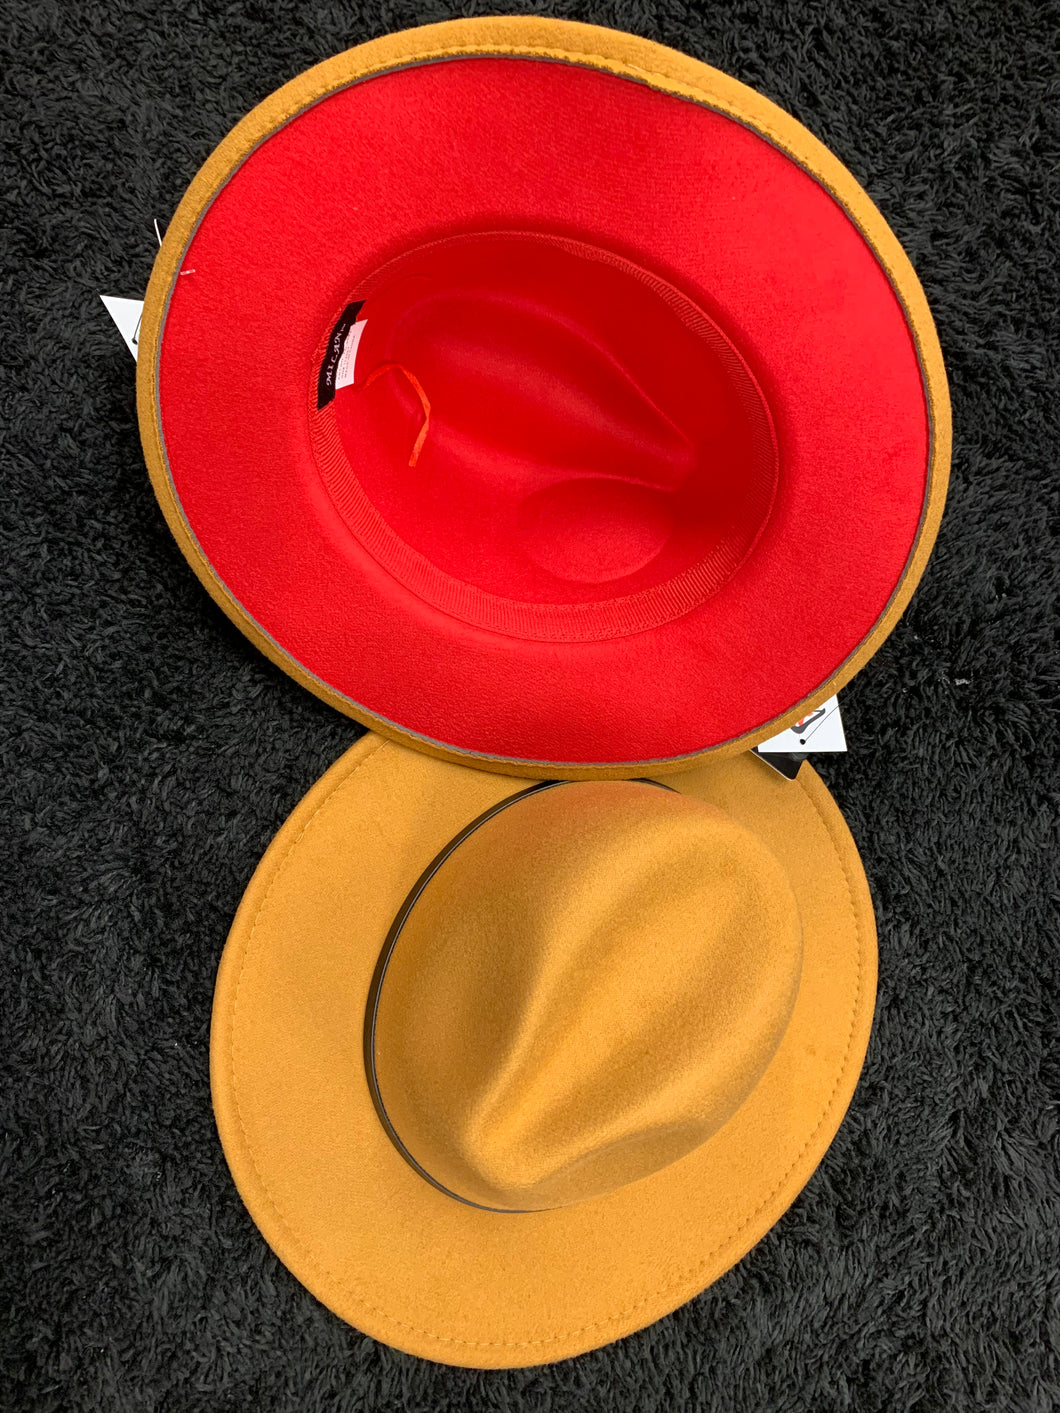 Mustard Fedora Hat with Red Bottom Adjustable Strings inside Hat Sizes S-XL